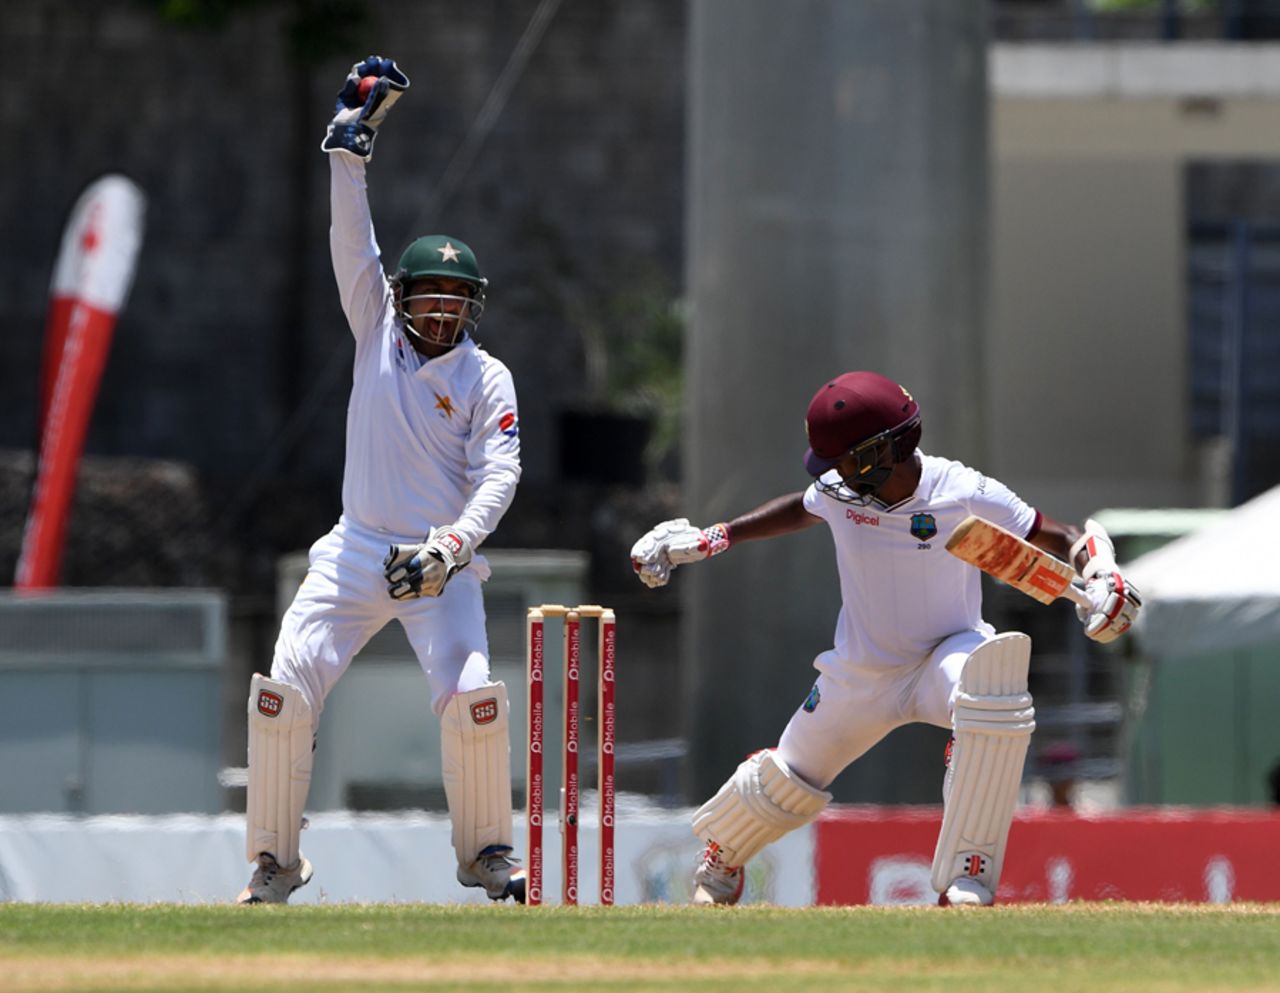 Sarfraz Ahmed appeals successfully for caught-behind against Kraigg Brathwaite, West Indies v Pakistan, 3rd Test, Roseau, 3rd day, May 12, 2017